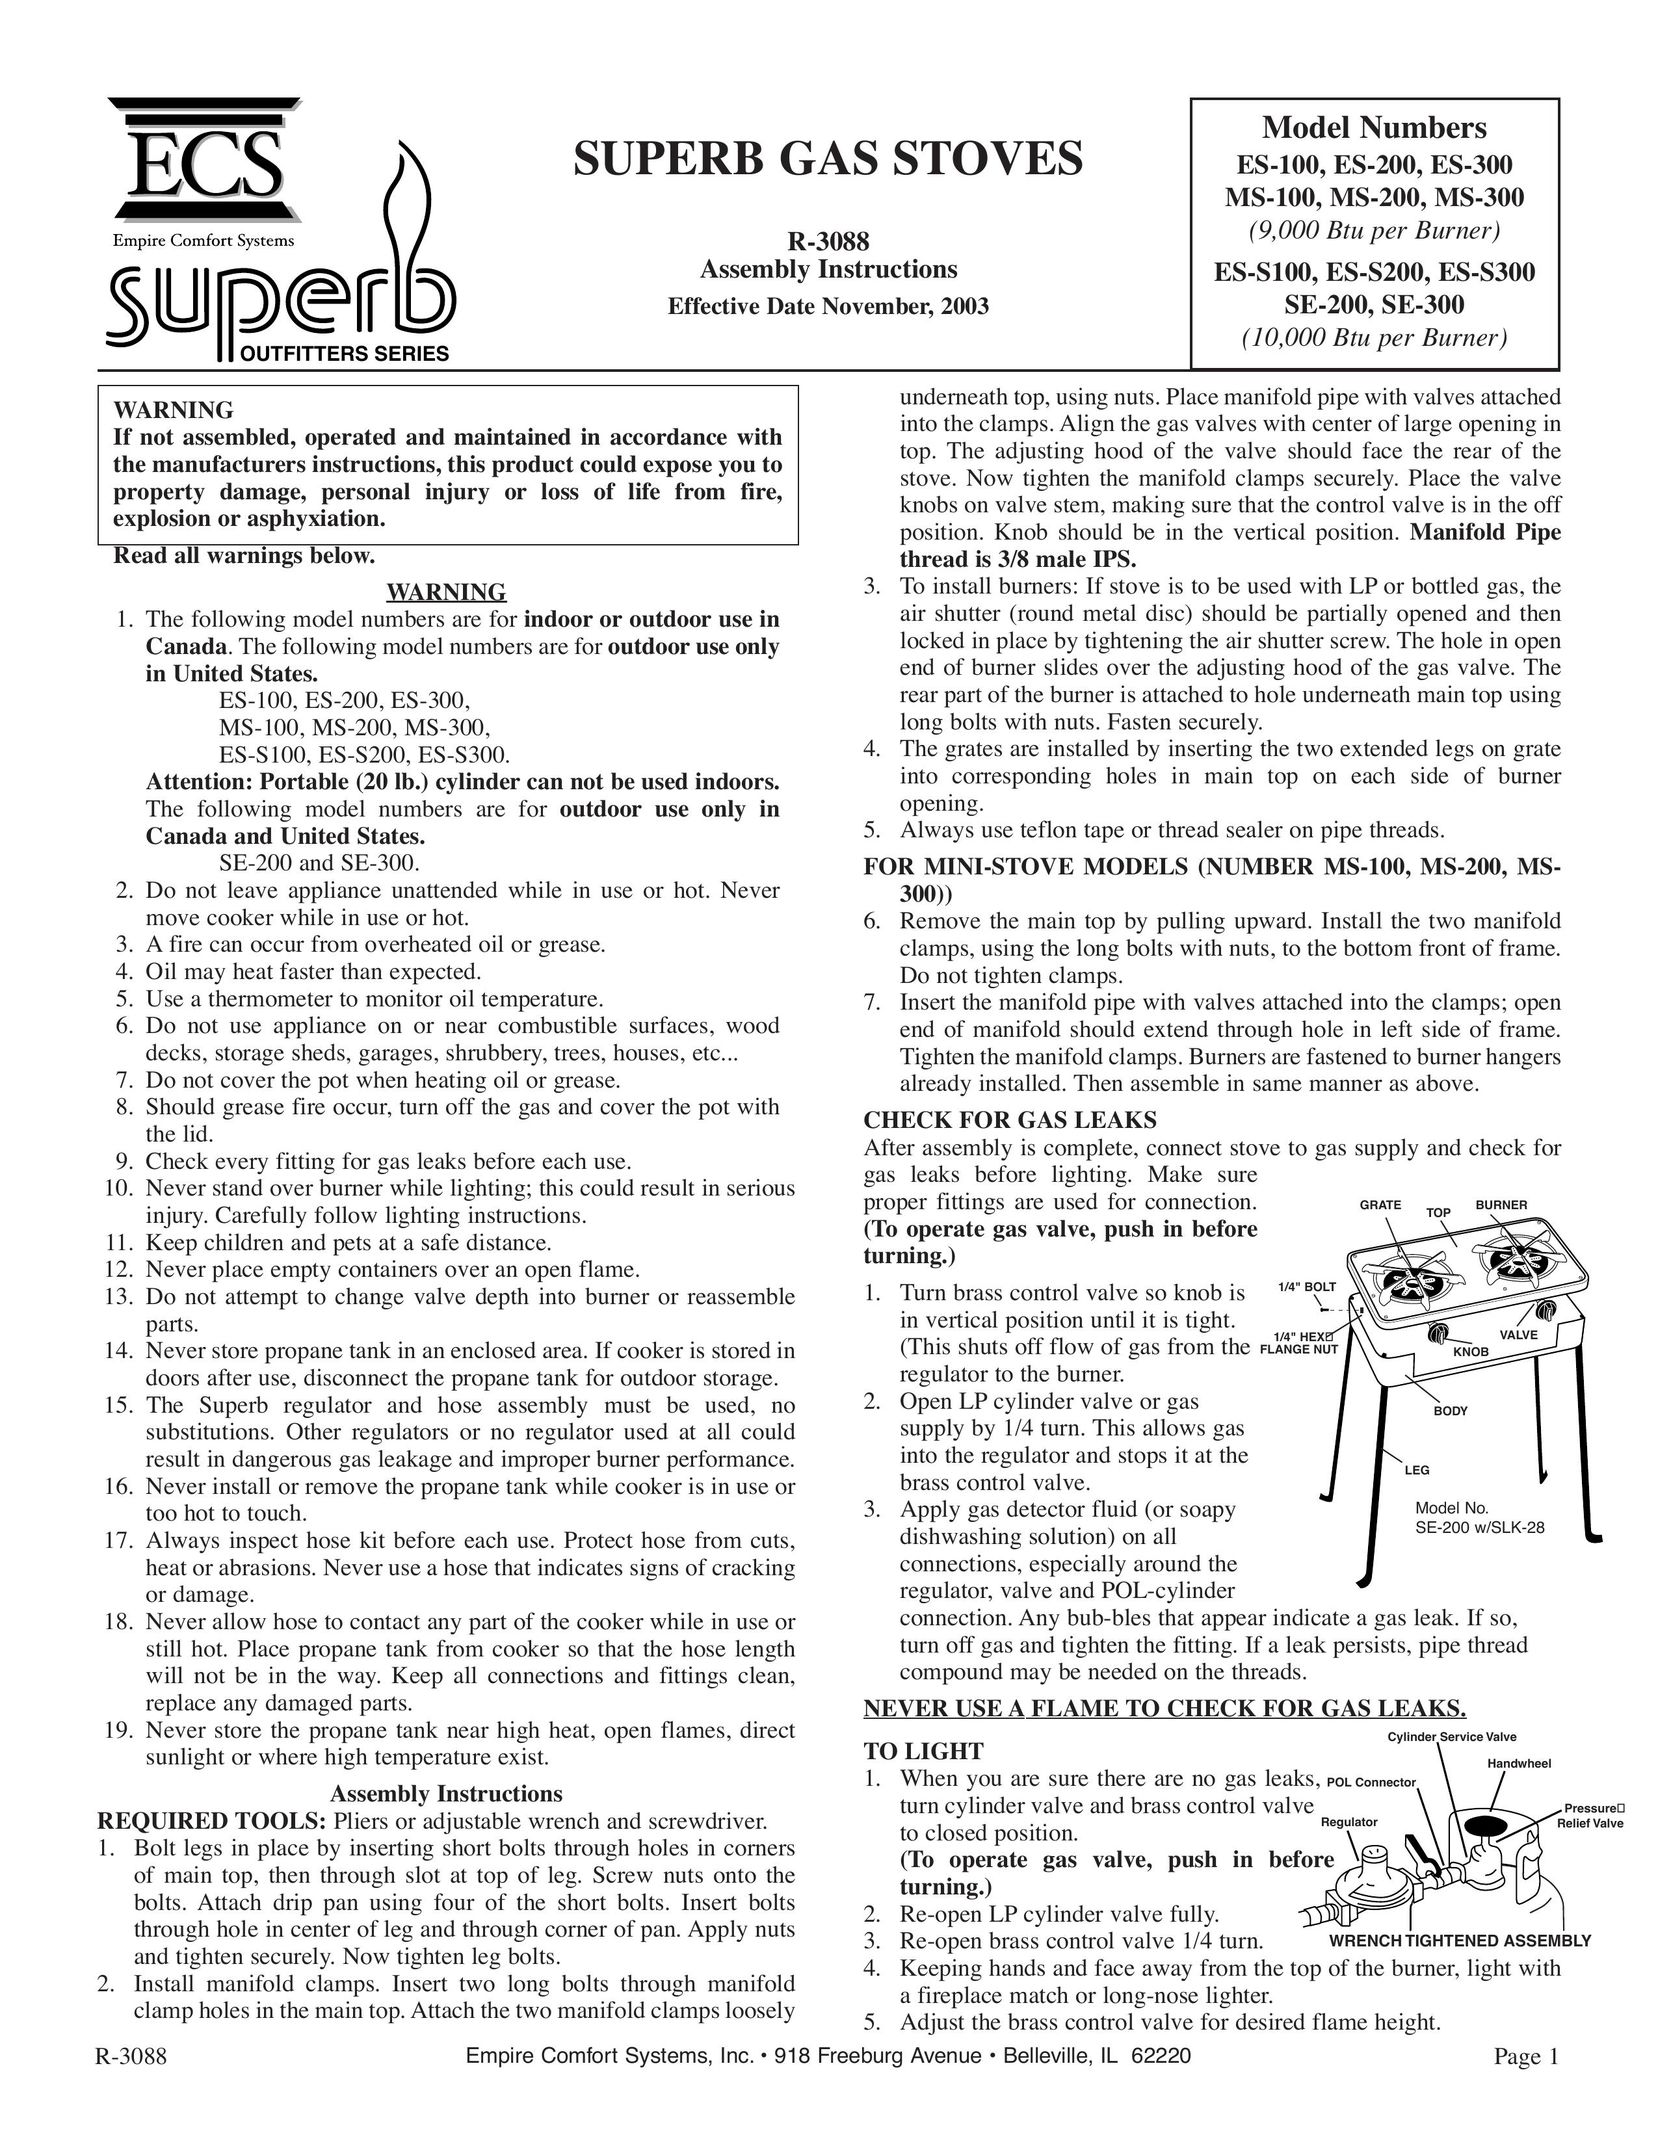 Empire Comfort Systems ES-S300 Stove User Manual